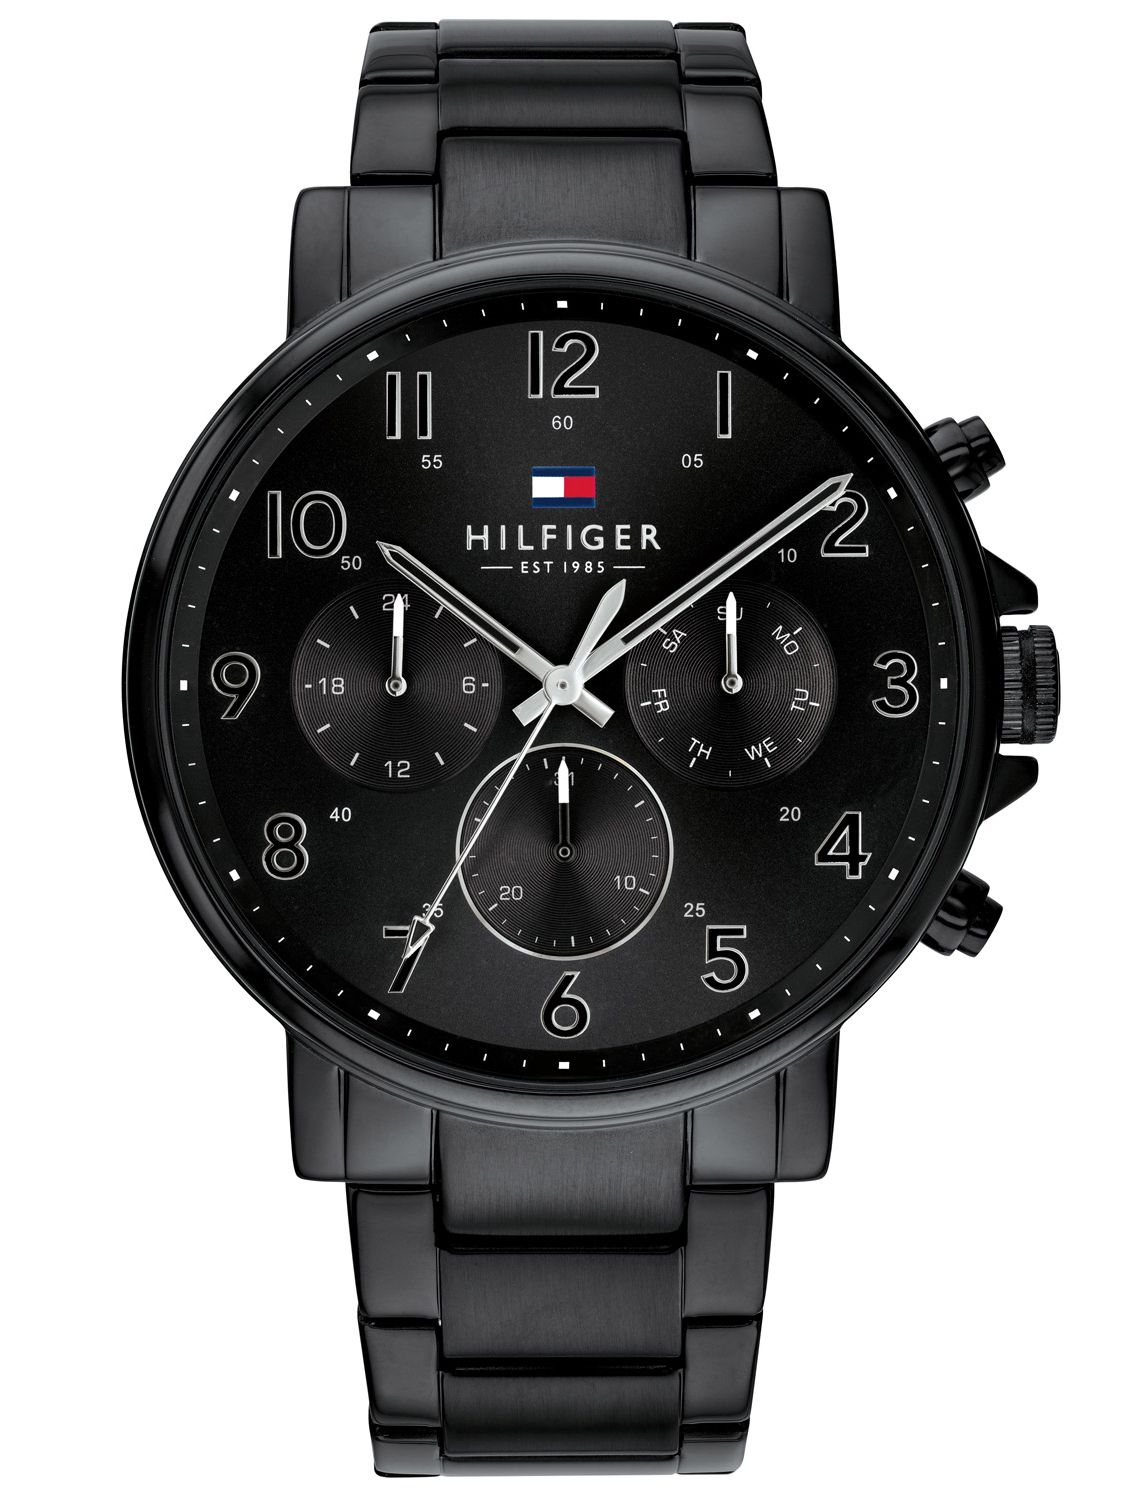 tommy hilfiger watches for men black